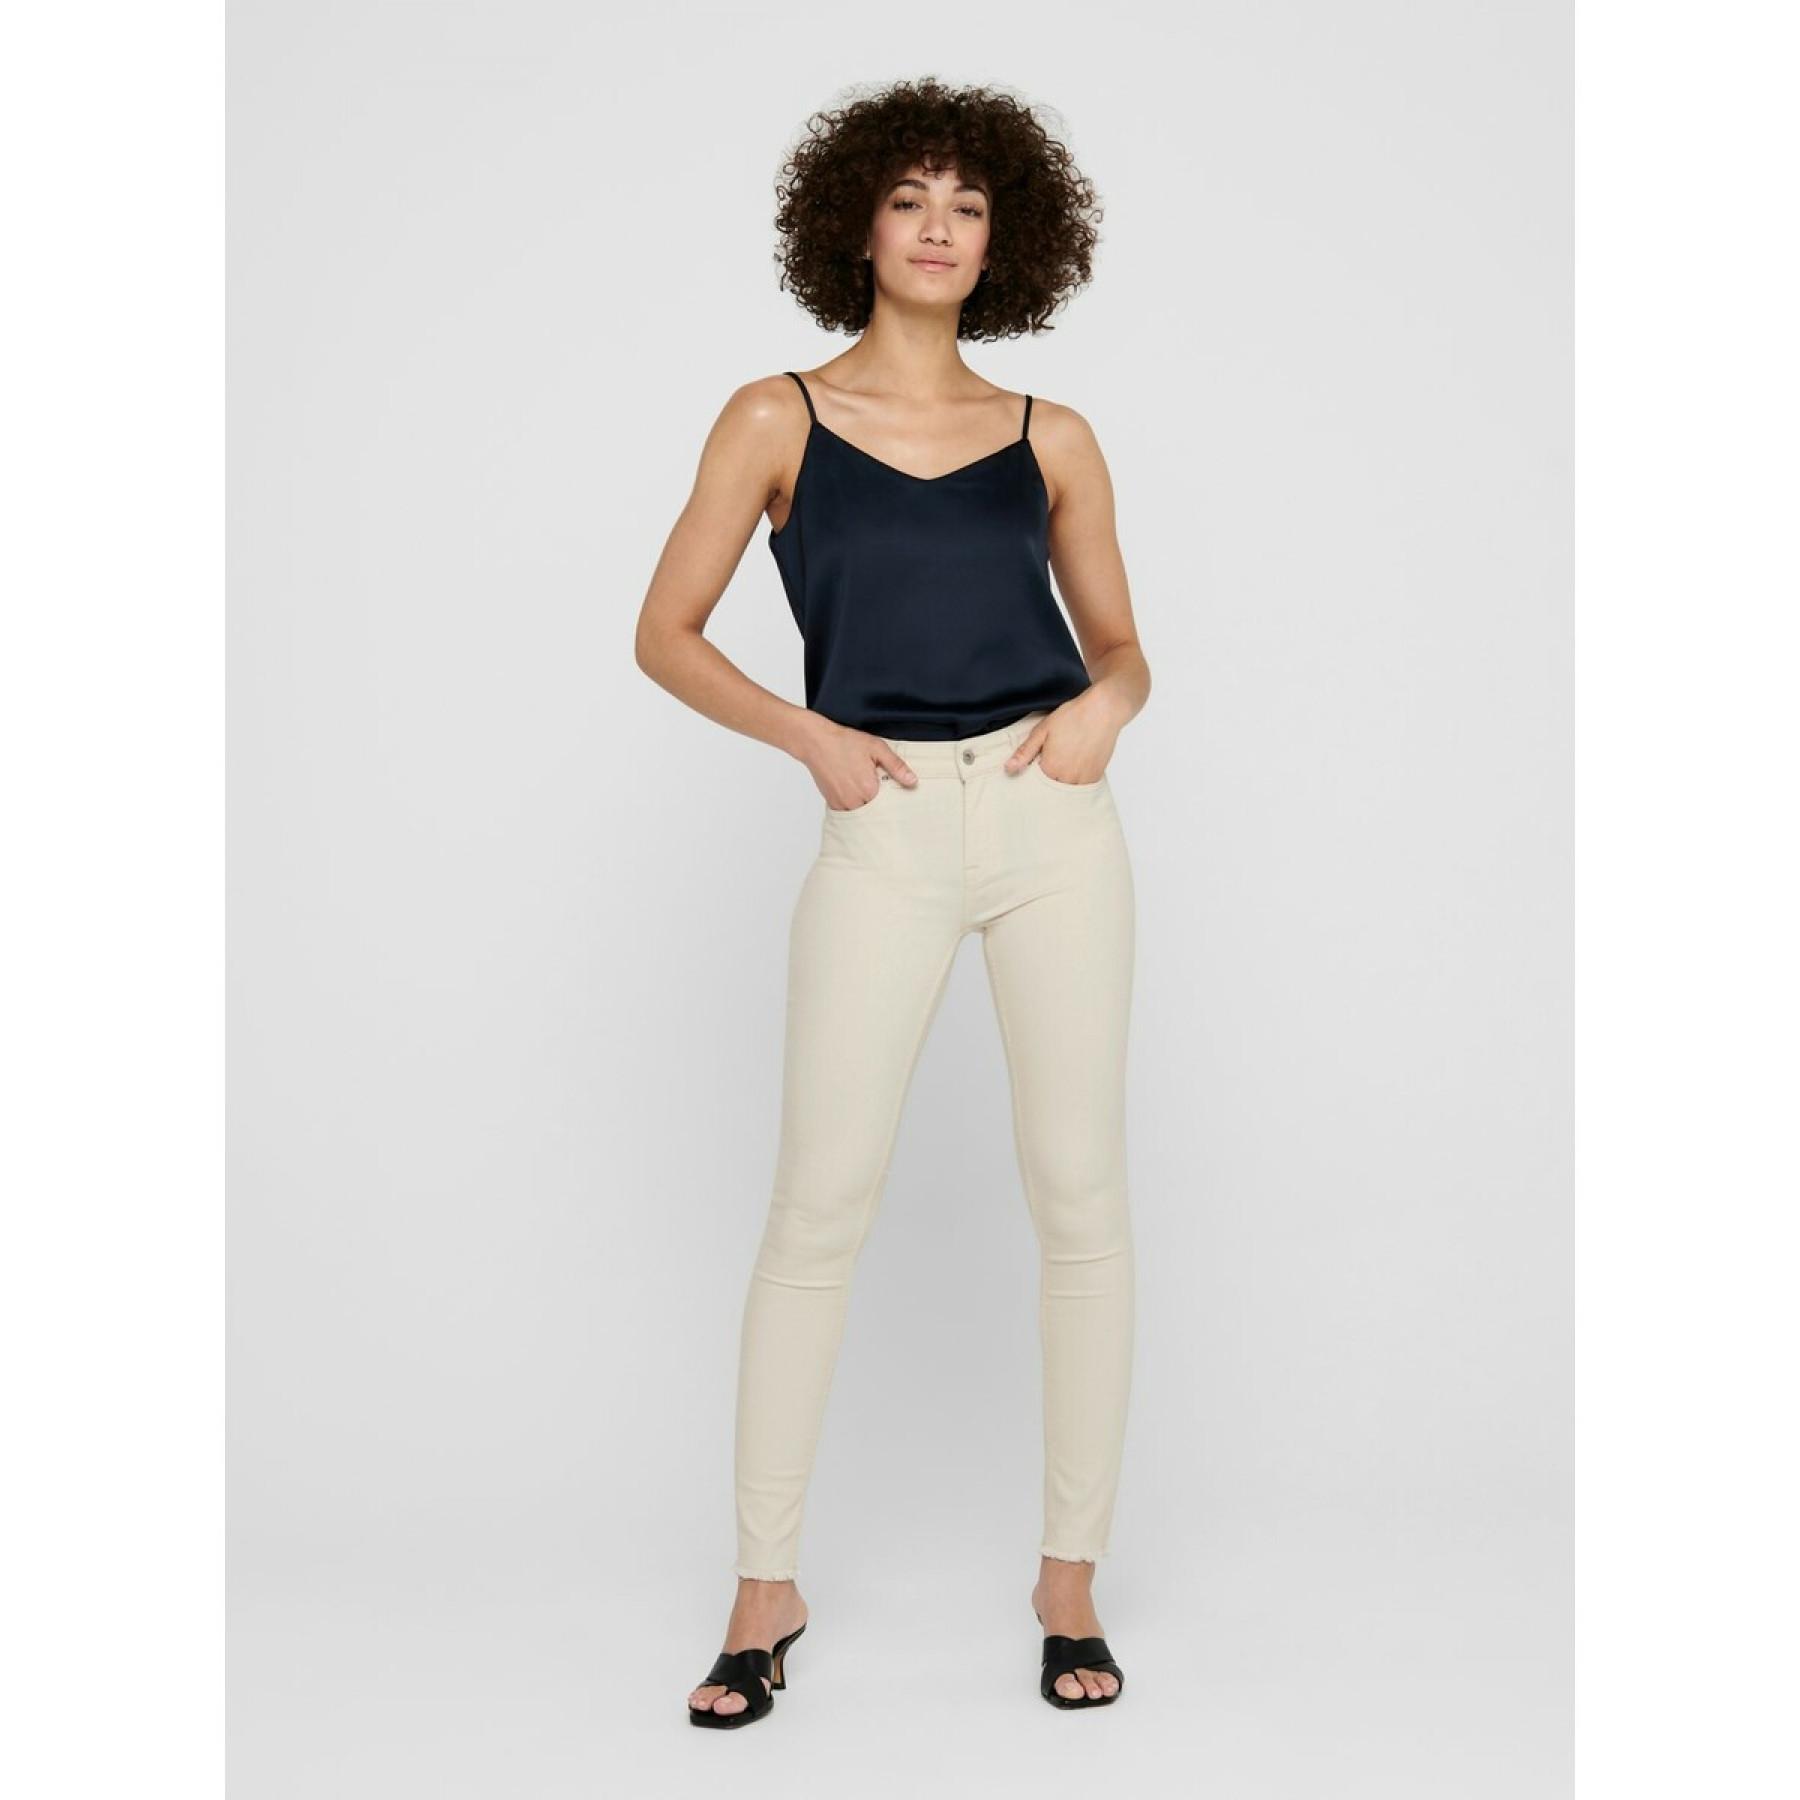 Women's trousers Only blush life